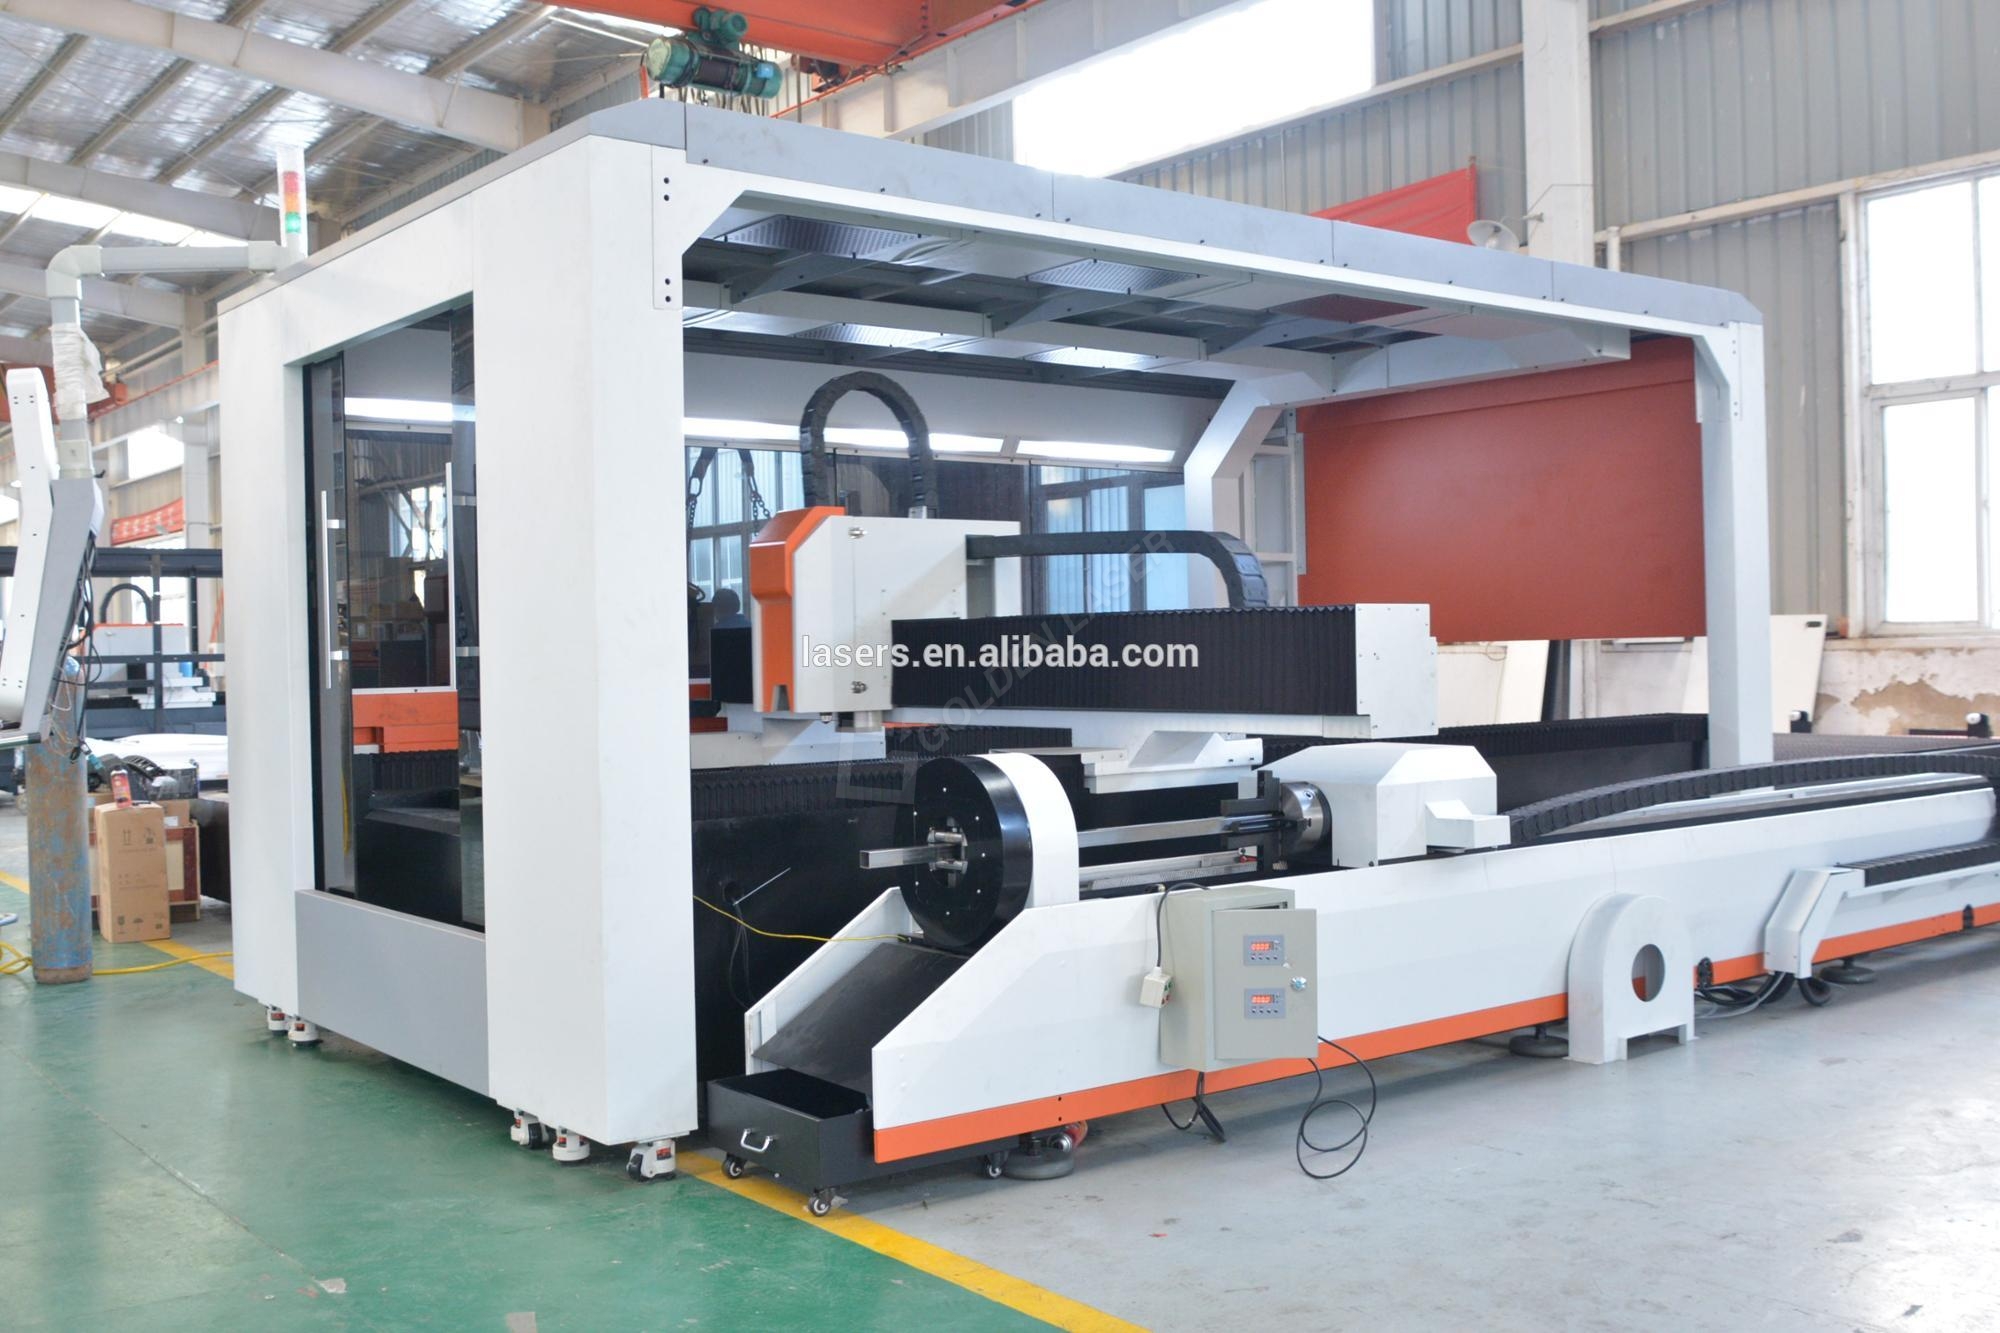 China New Product Plasma Plate Cutting Machine -<br />
 Hot Sale Full Closed Exchange Table Fiber Laser Sheet And Tube Cutting Machine Price - Vtop Fiber Laser